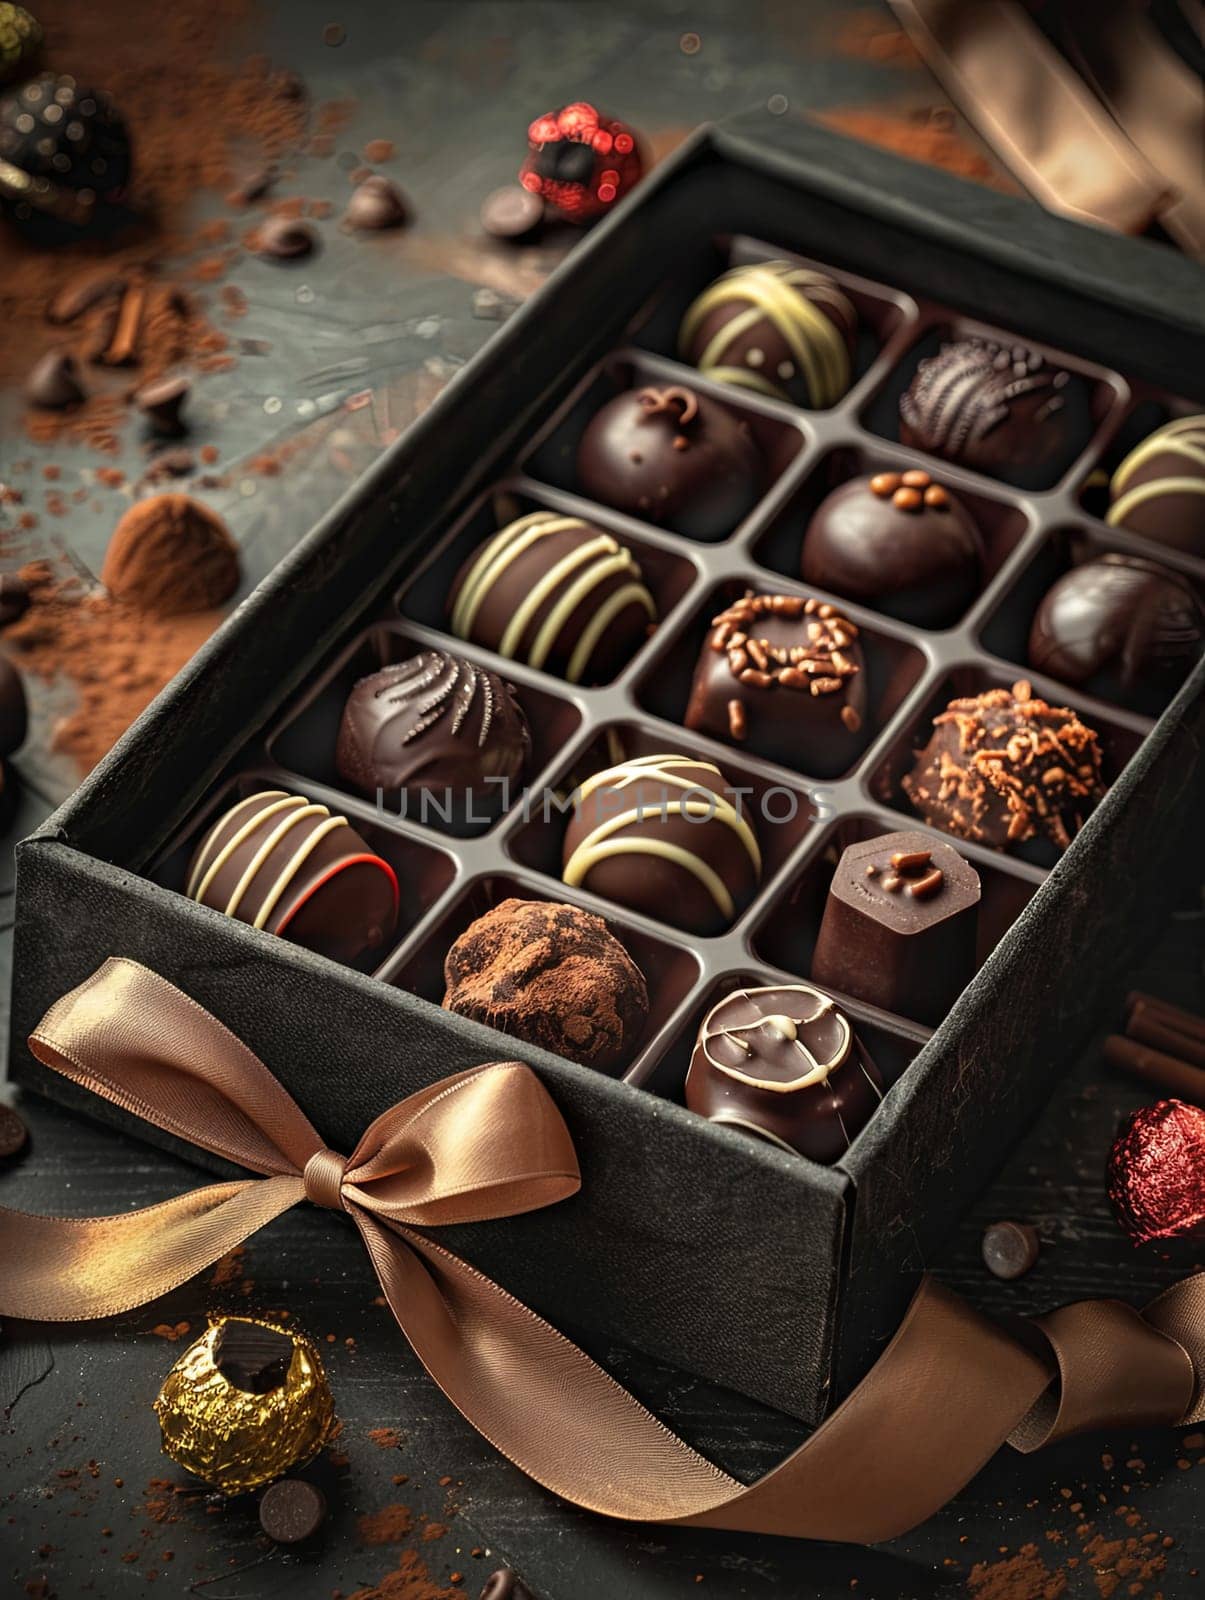 Elegant box of chocolate truffles adorned with a ribbon in rich dark colors for a luxurious presentation.